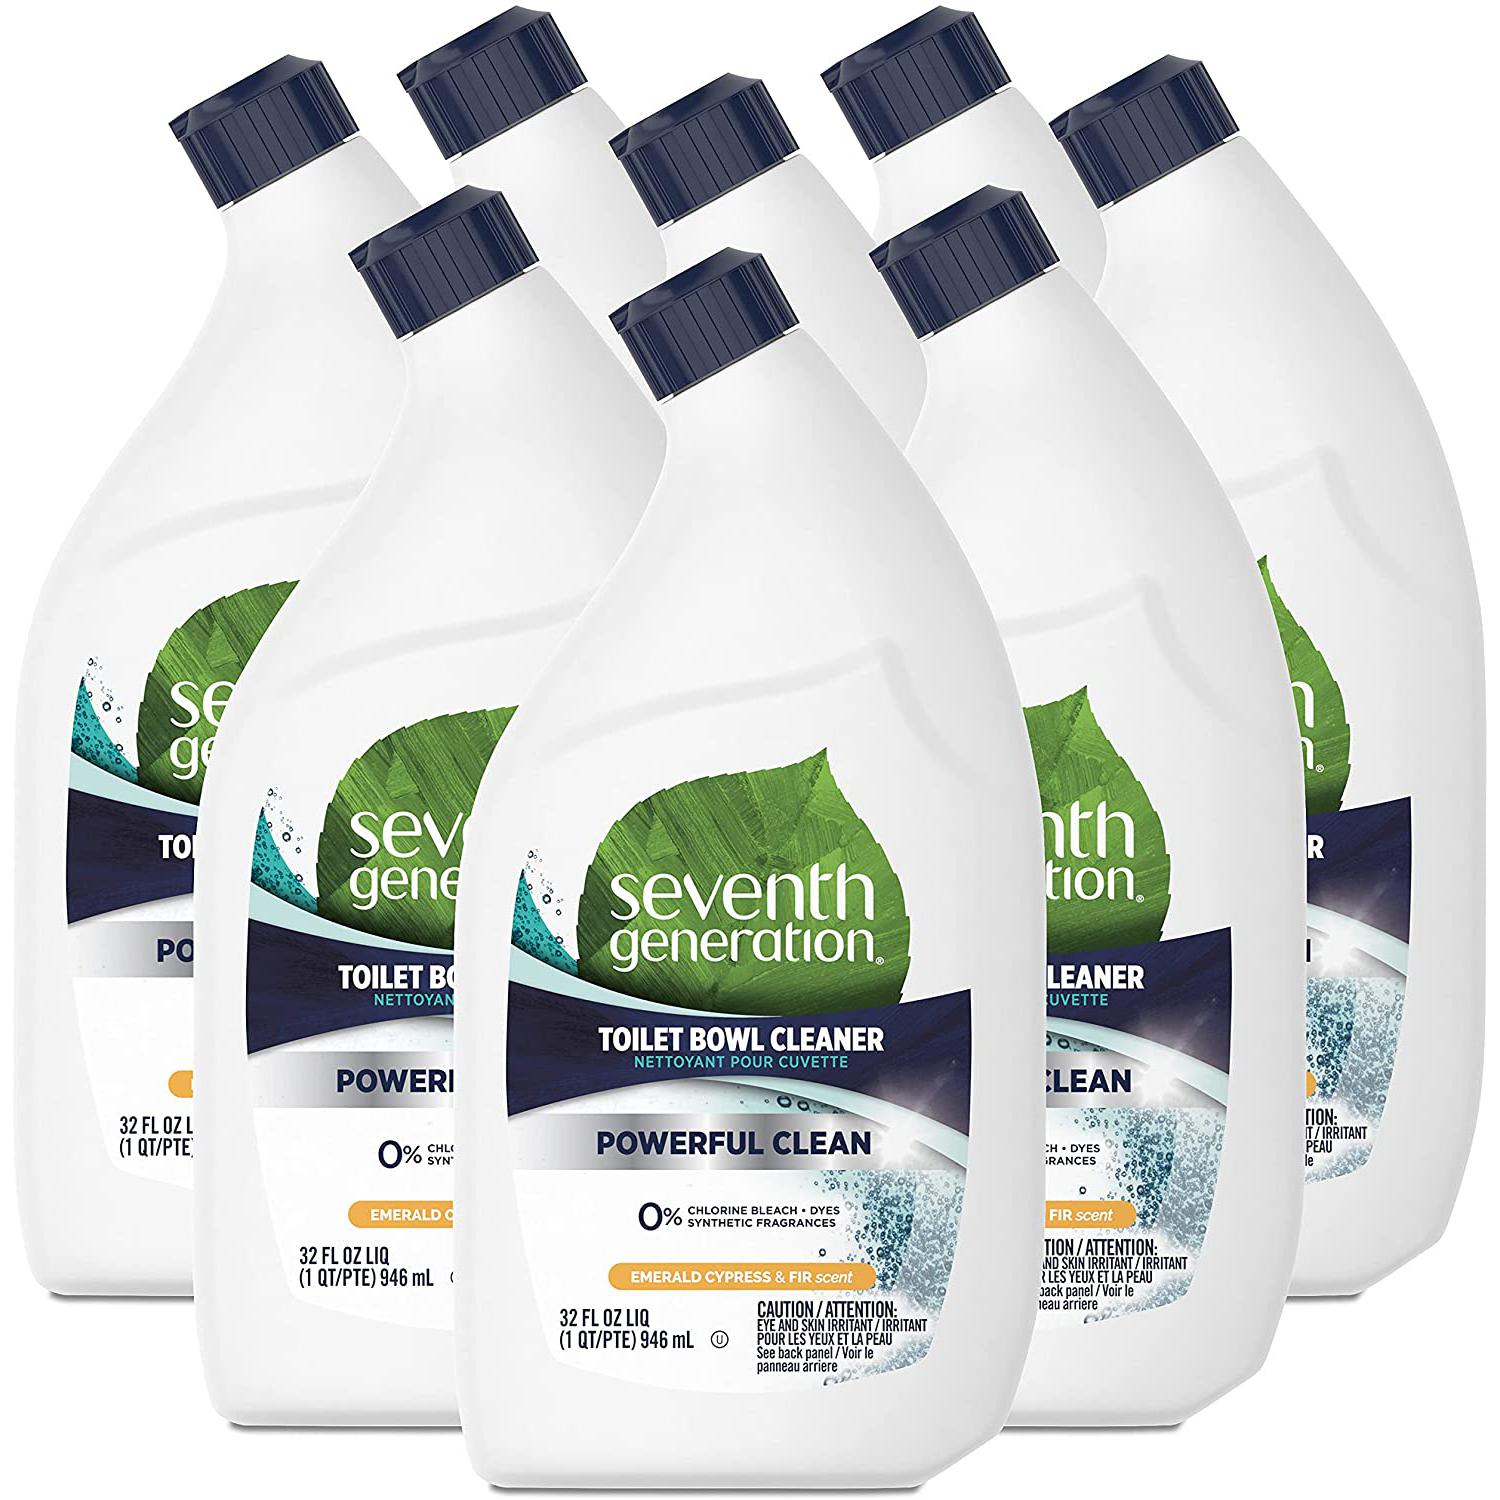 8 Seventh Generation Toilet Bowl Cleaner for $12.63 Shipped